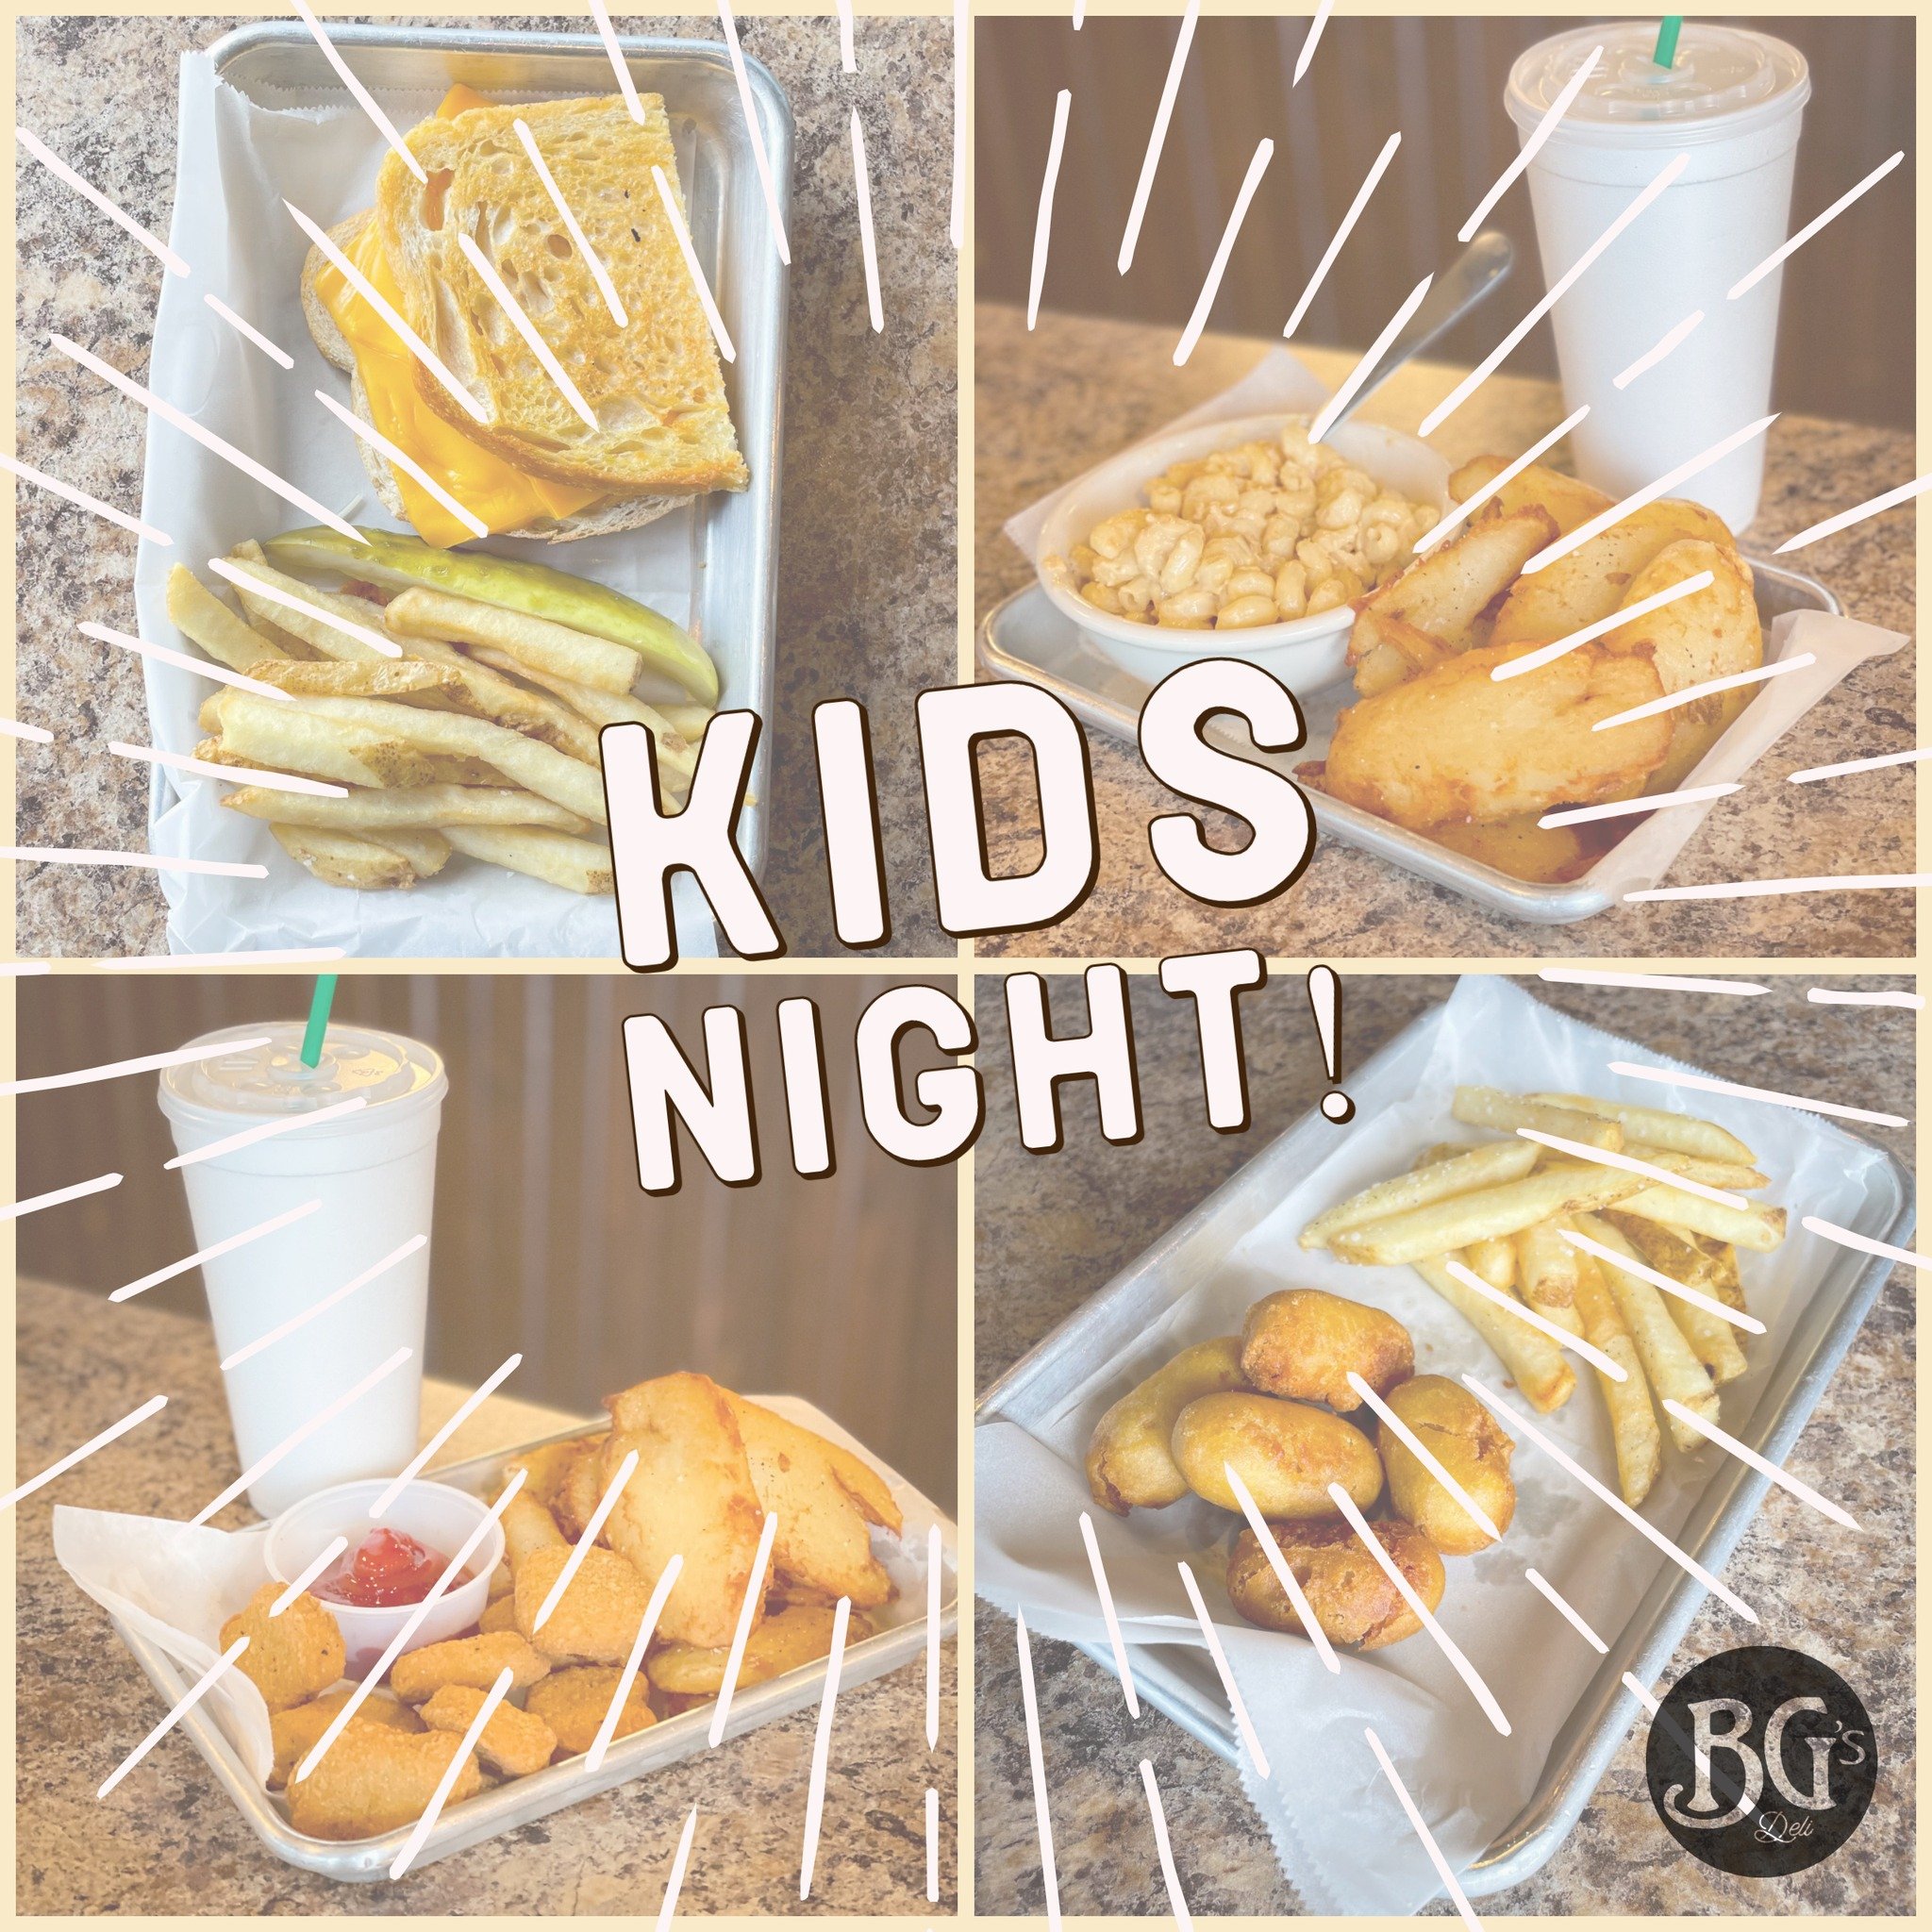 Receive a free kids meal with every entree or sandwich purchased every Monday!

#kidsnight #bgsdeli #eatlocal